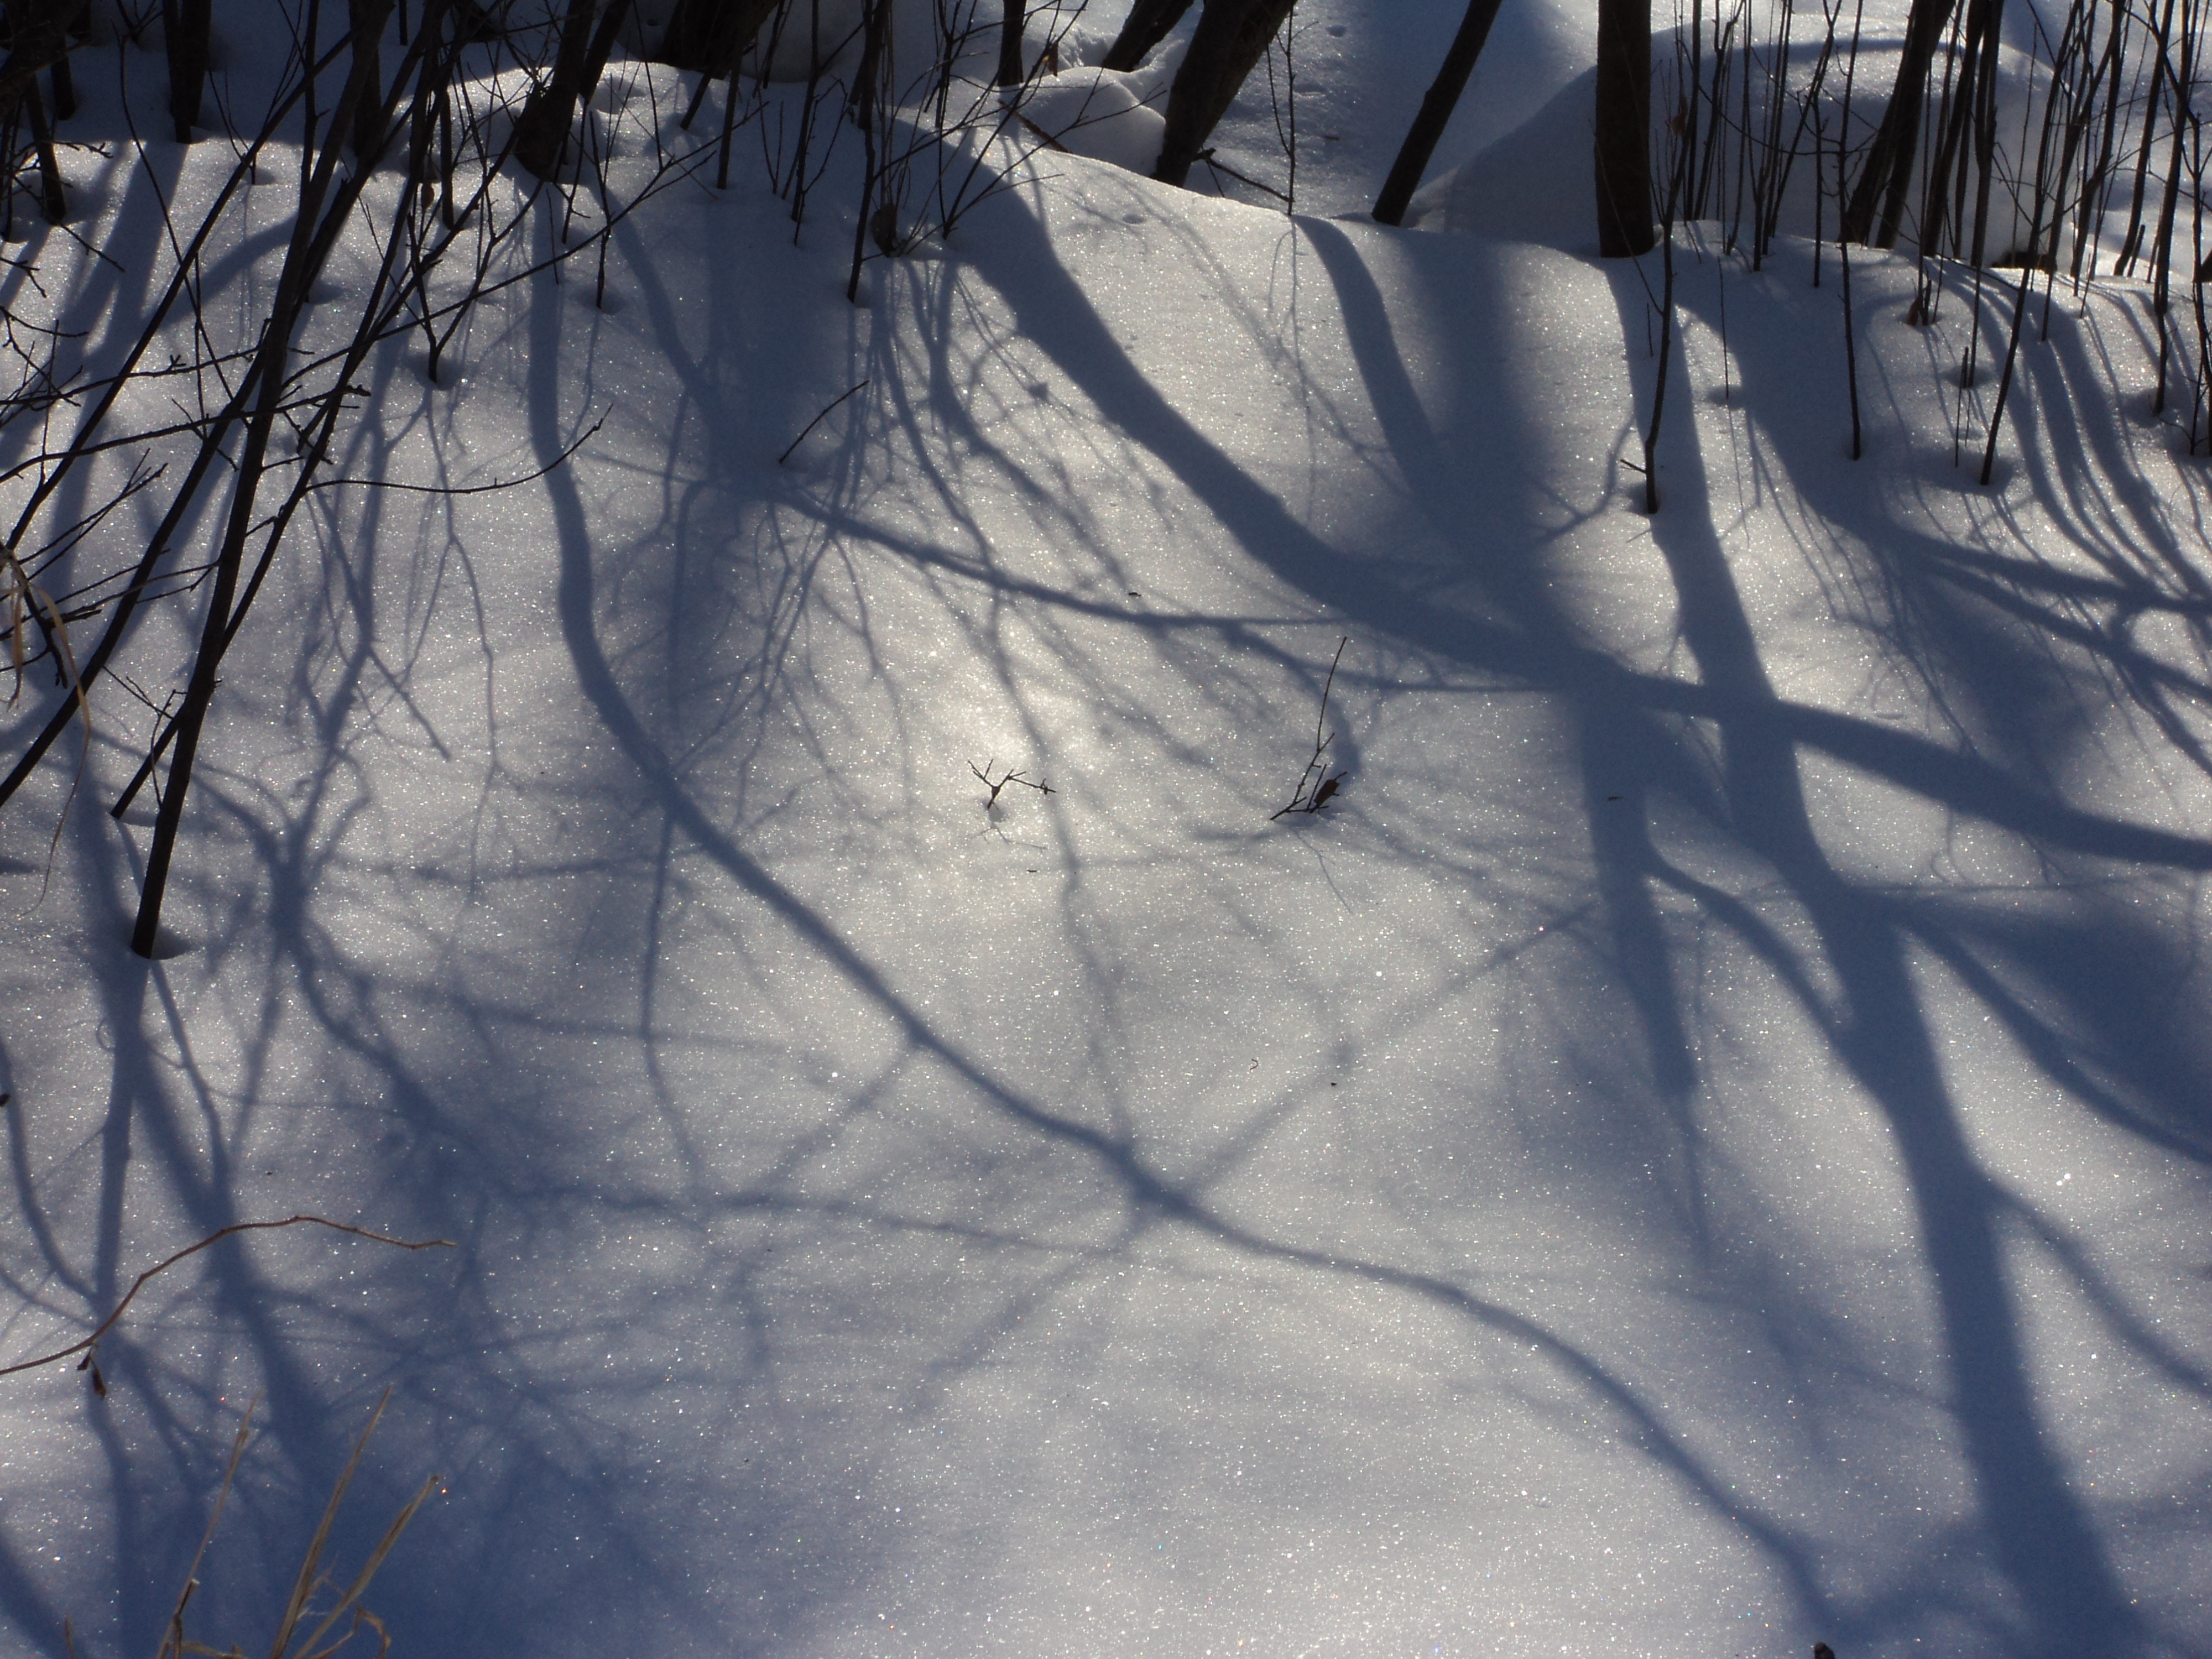 Watching the snow: images of beauty I find in shadow patterns ...